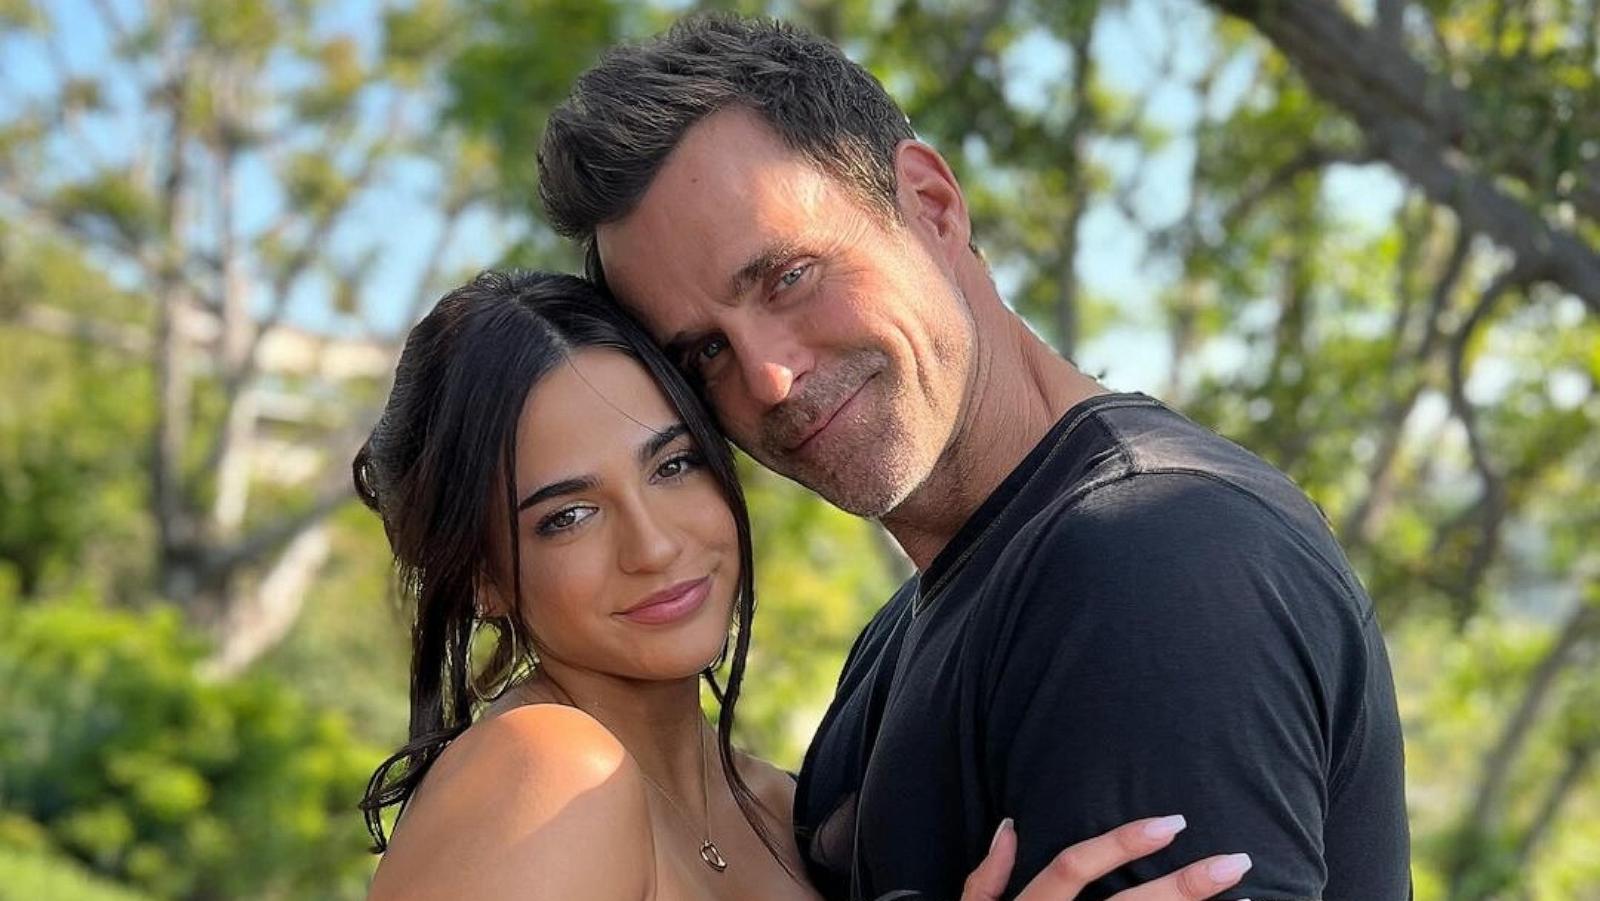 PHOTO: Cameron Mathison and his daughter Leila appear in this screengrab from an Instagram post Mathison shared over the weekend.